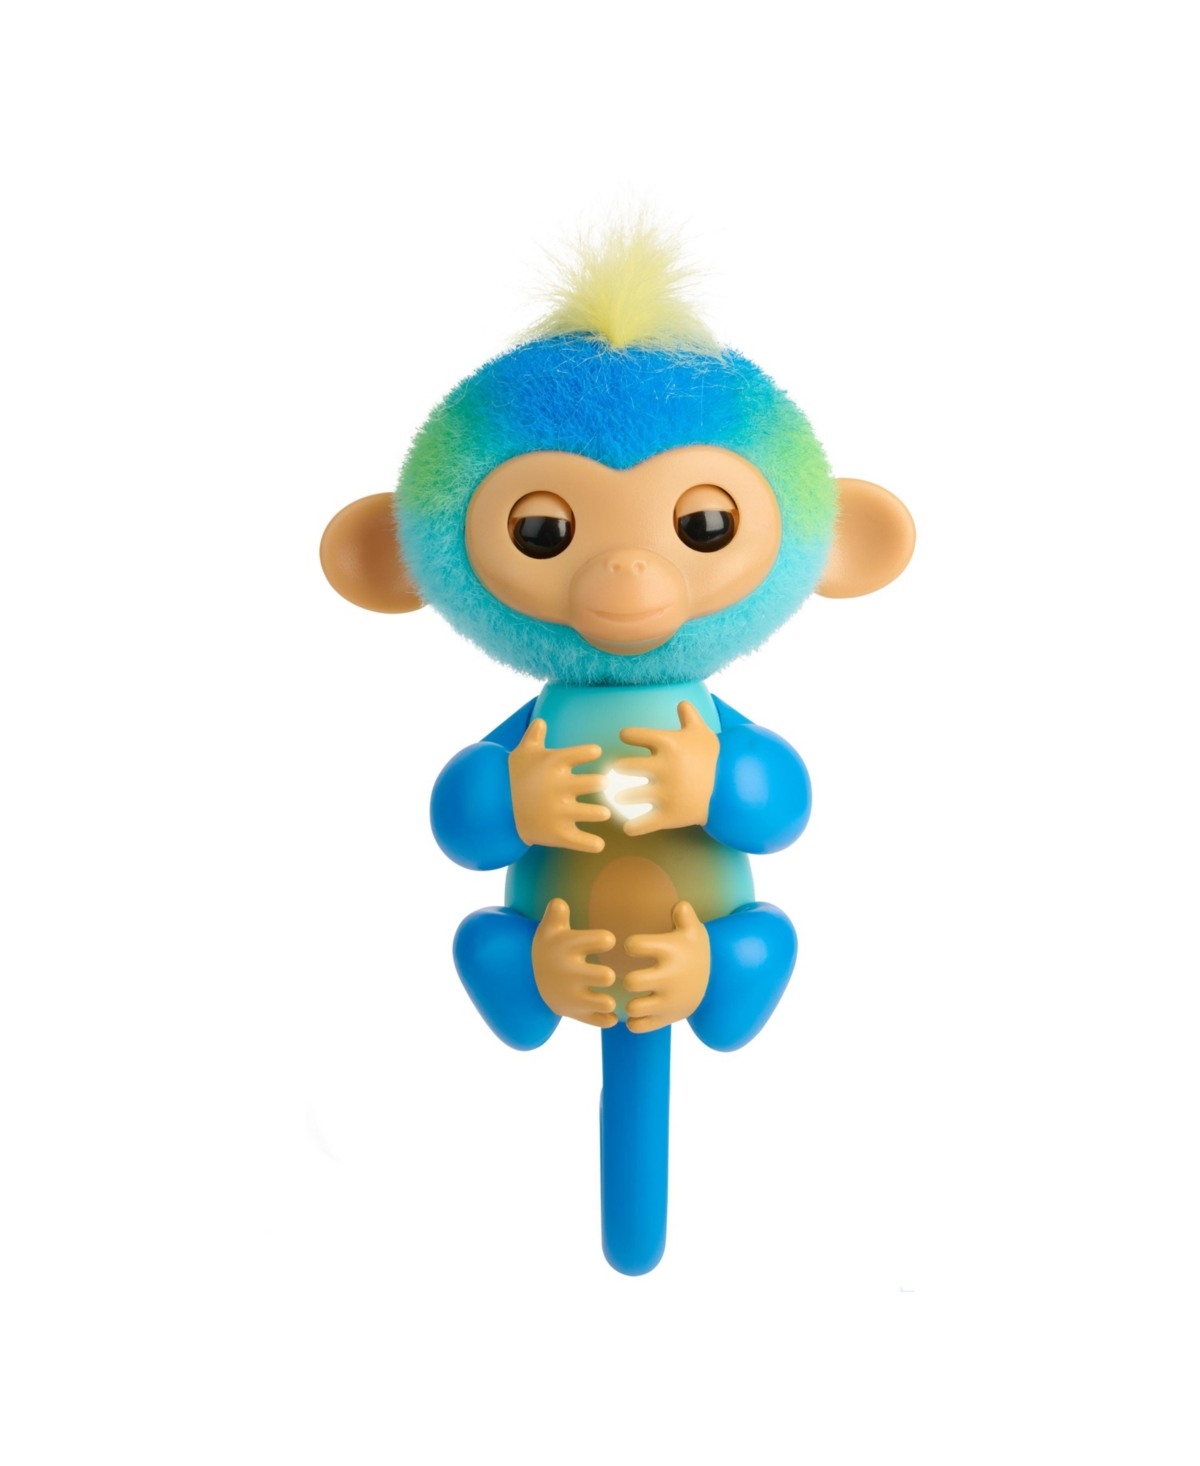 Fingerlings Interactive Baby Monkey Reacts To Touch – 70+ Sounds & Reactions, Leo In No Color